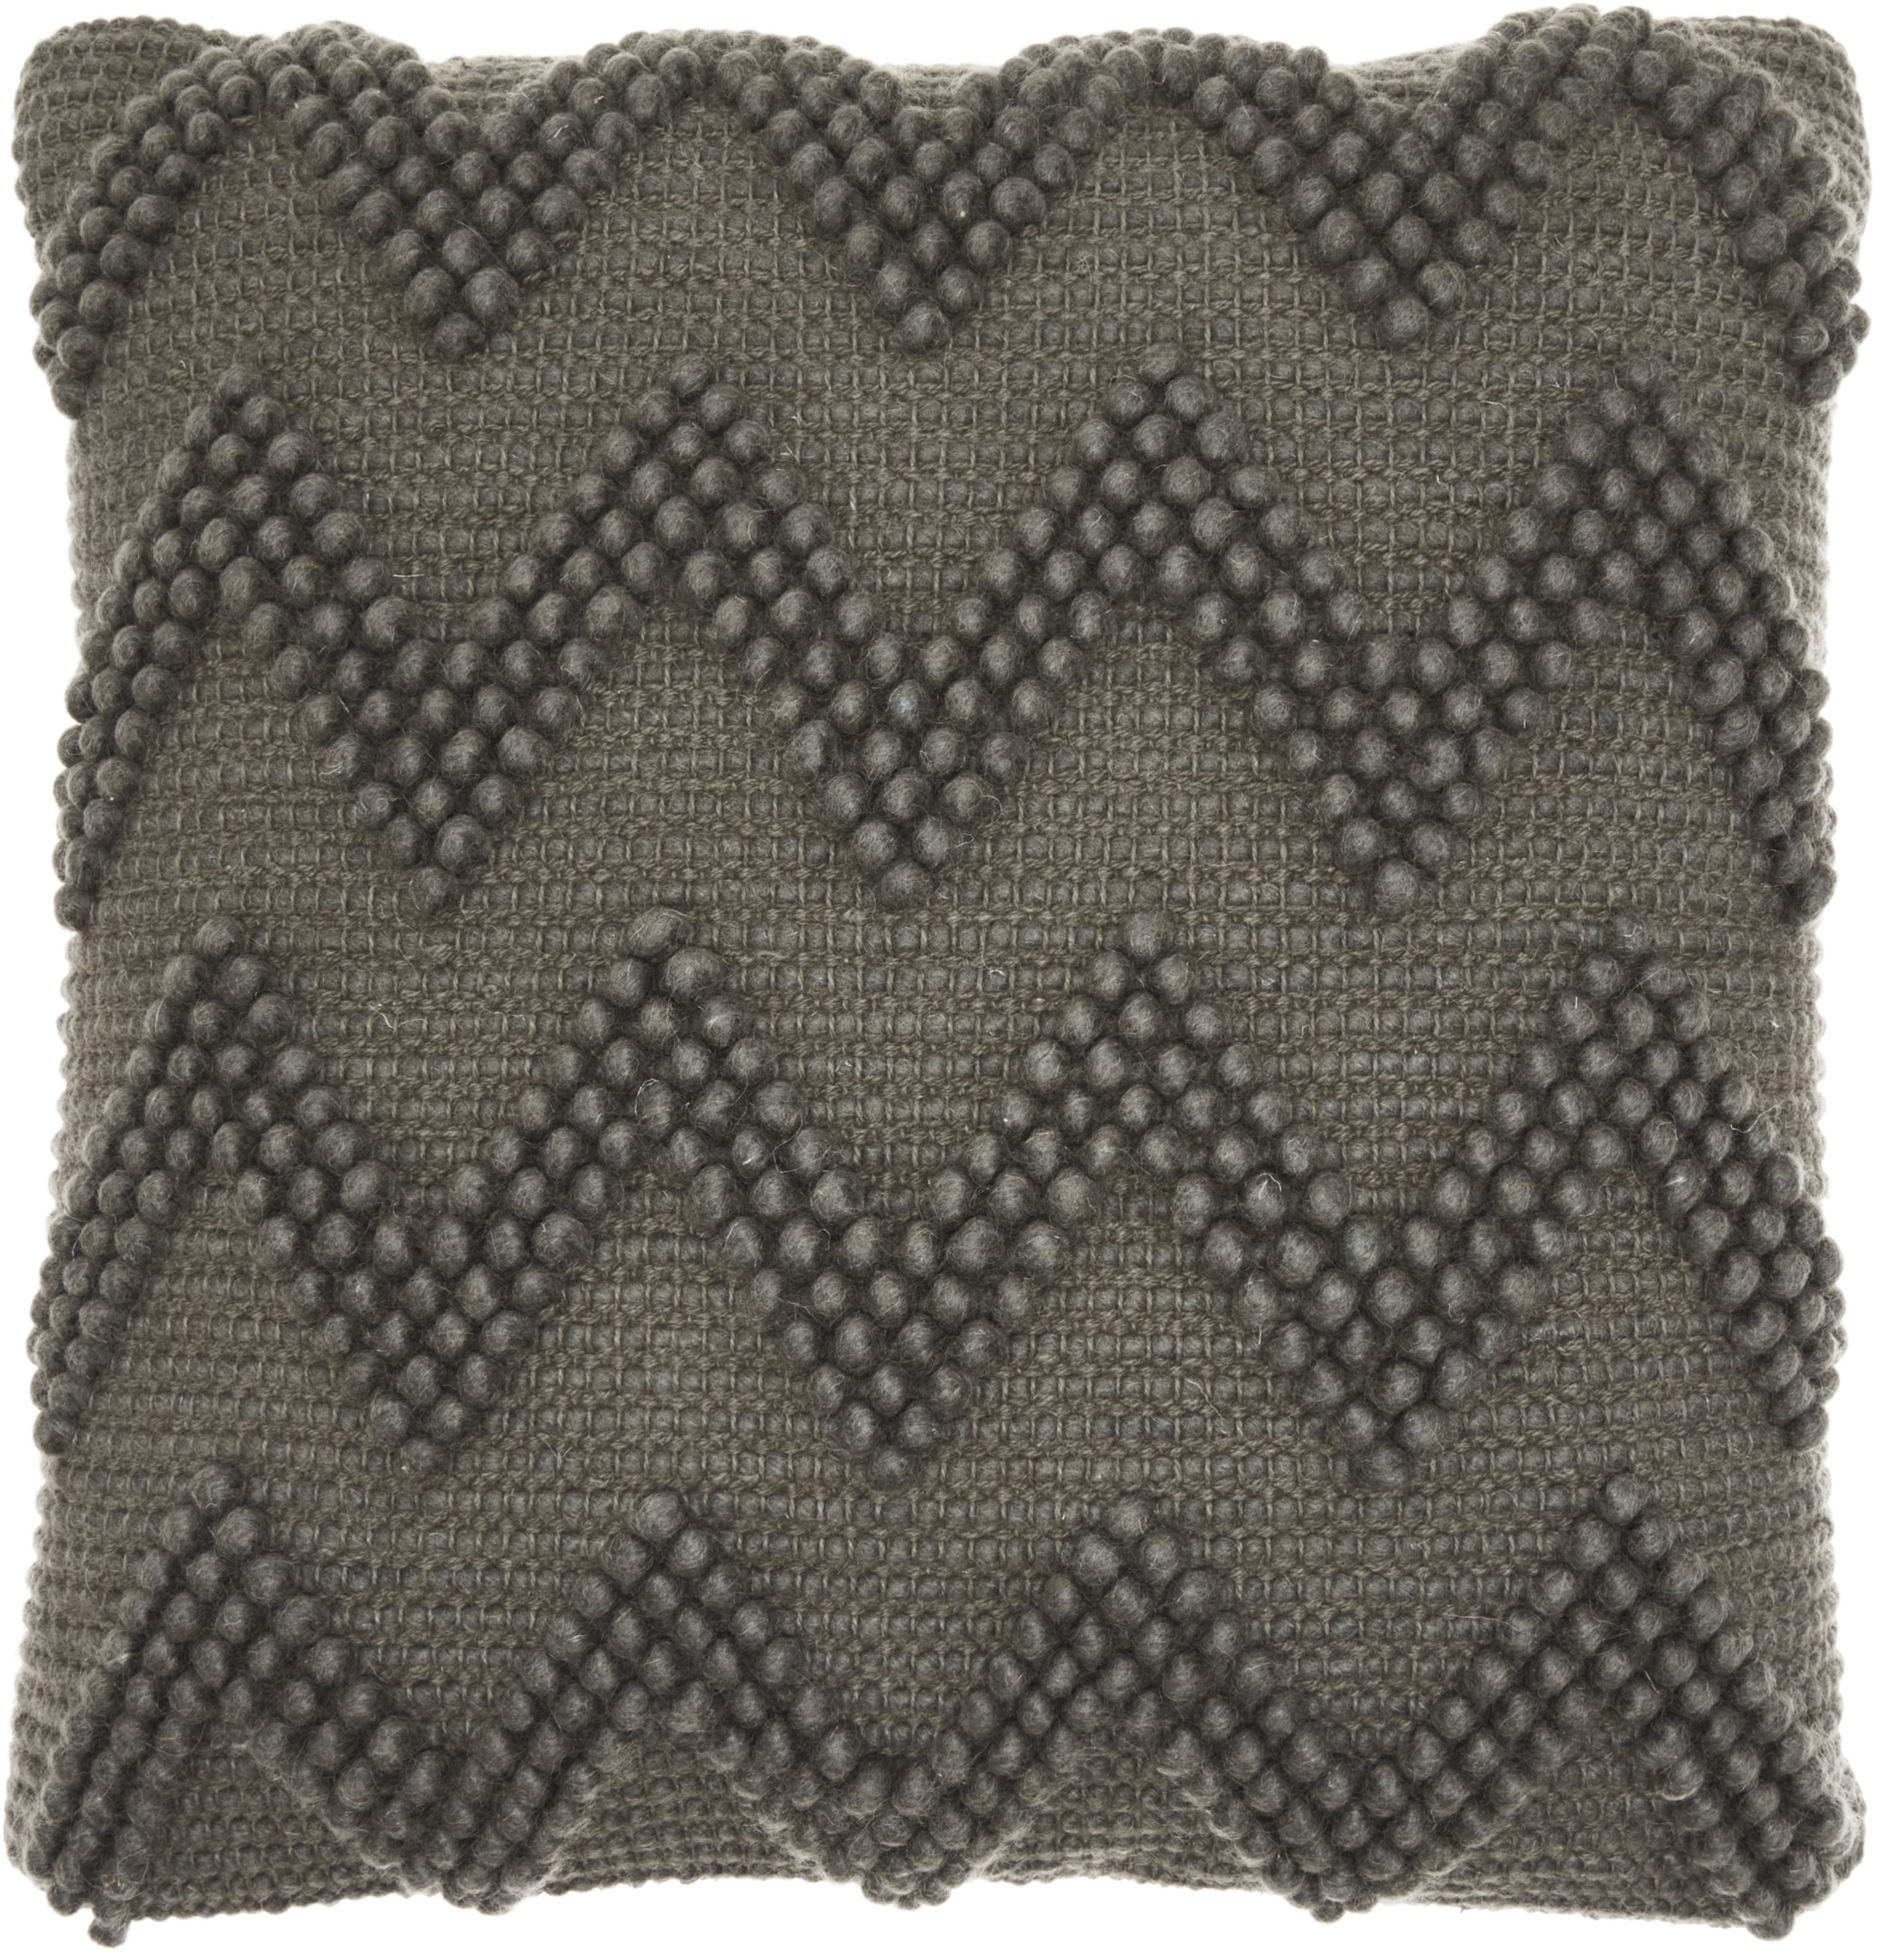 Nourison Life Styles Charcoal Decorative Throw Pillow , 20